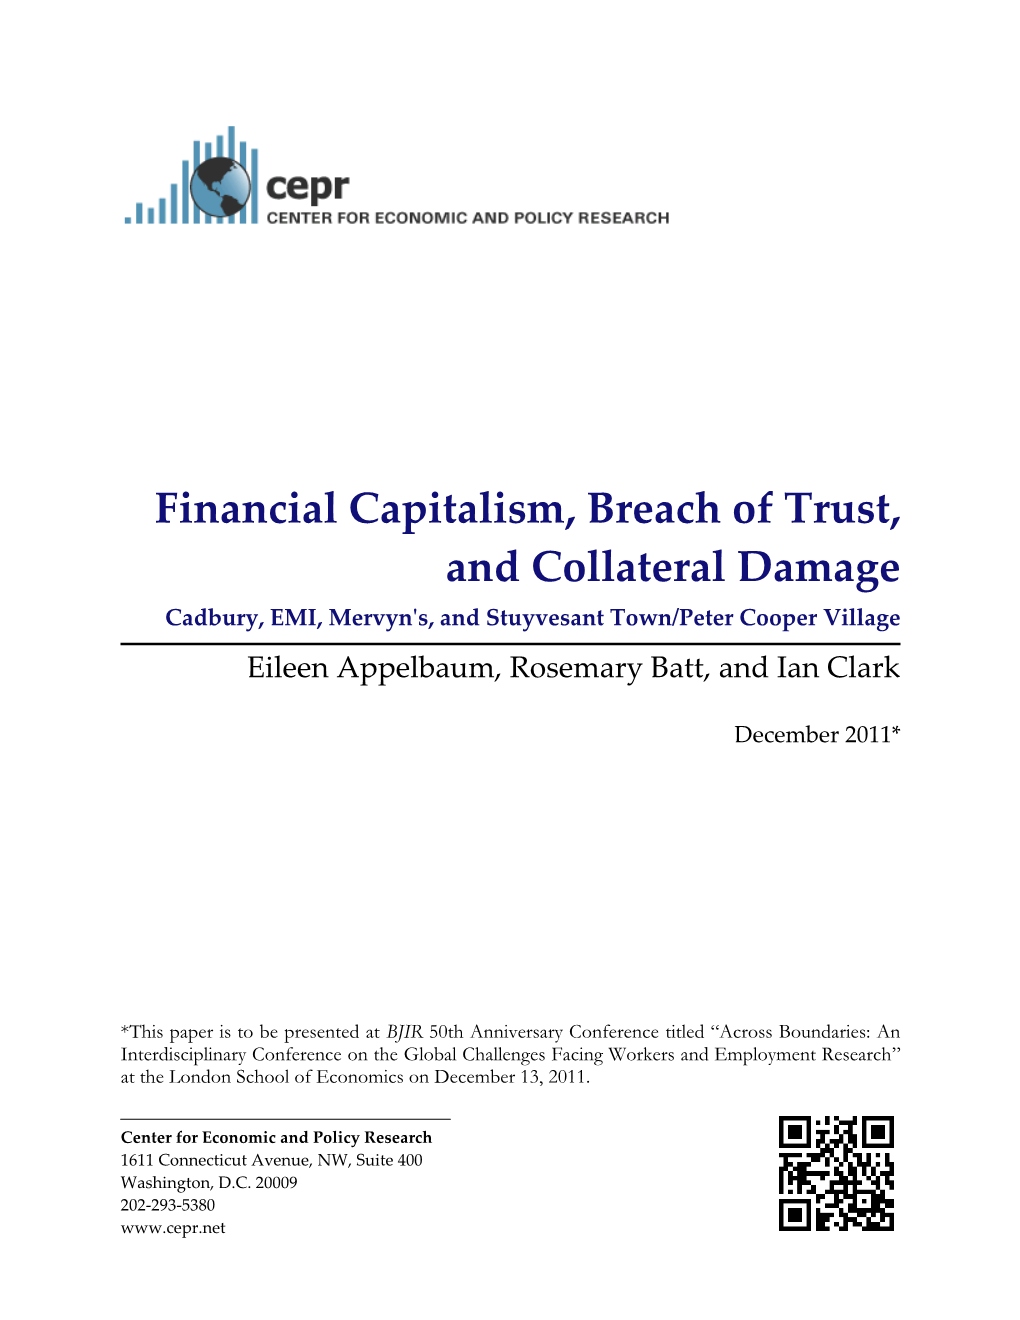 Financial Capitalism, Breach of Trust, and Collateral Damage